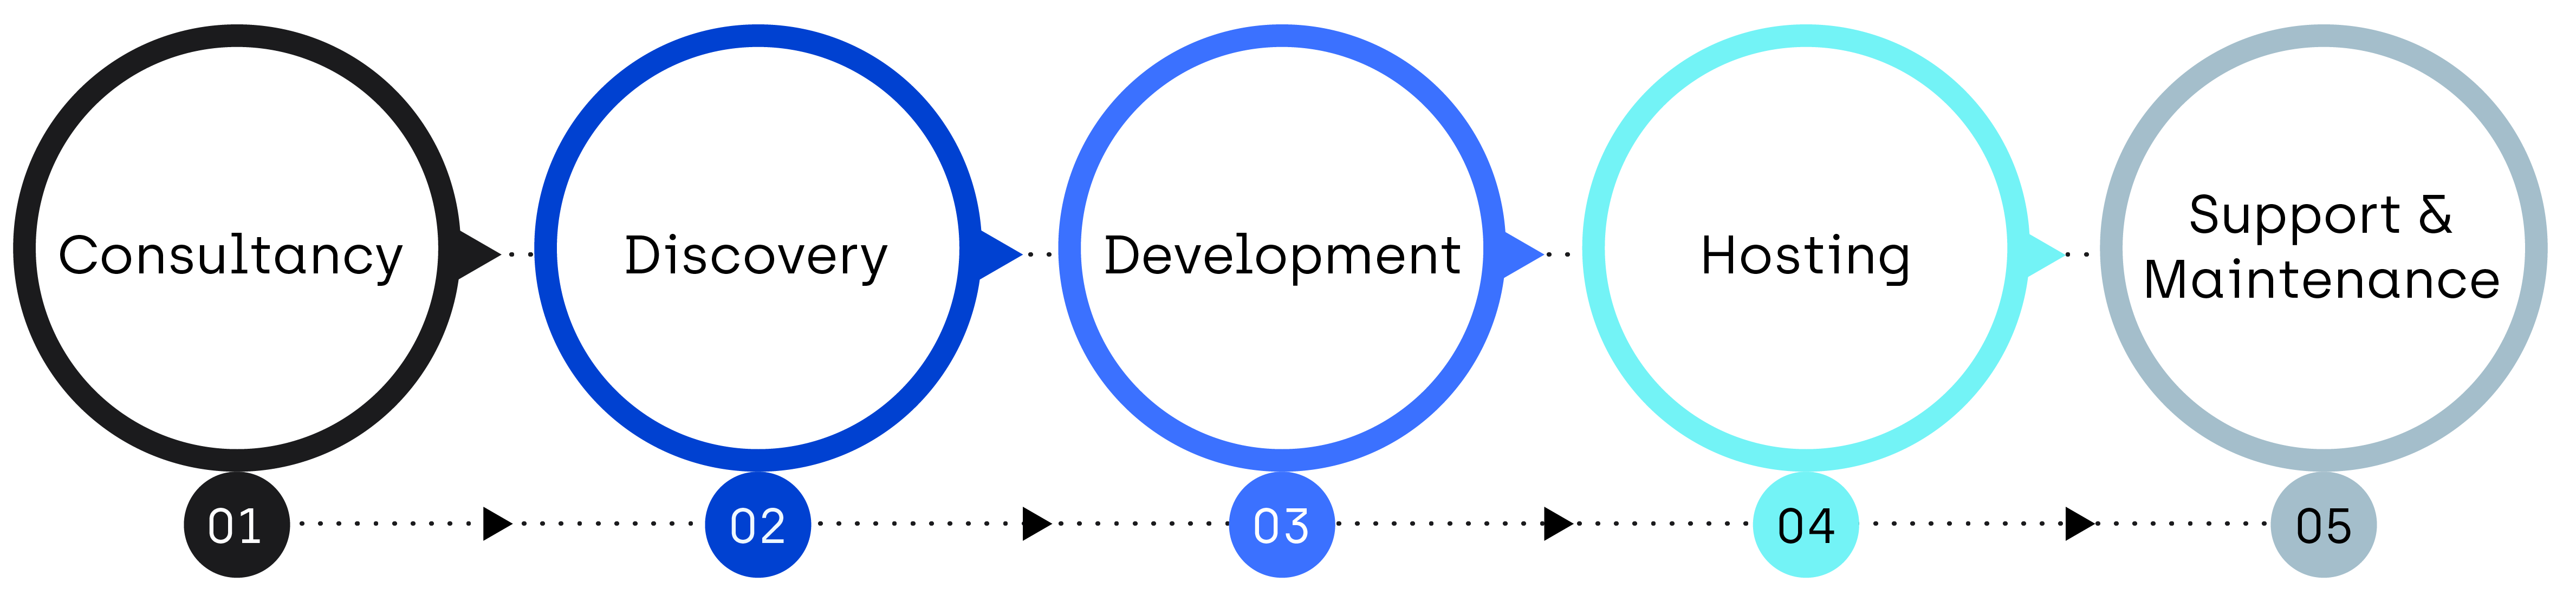 Our end-to-end software development process